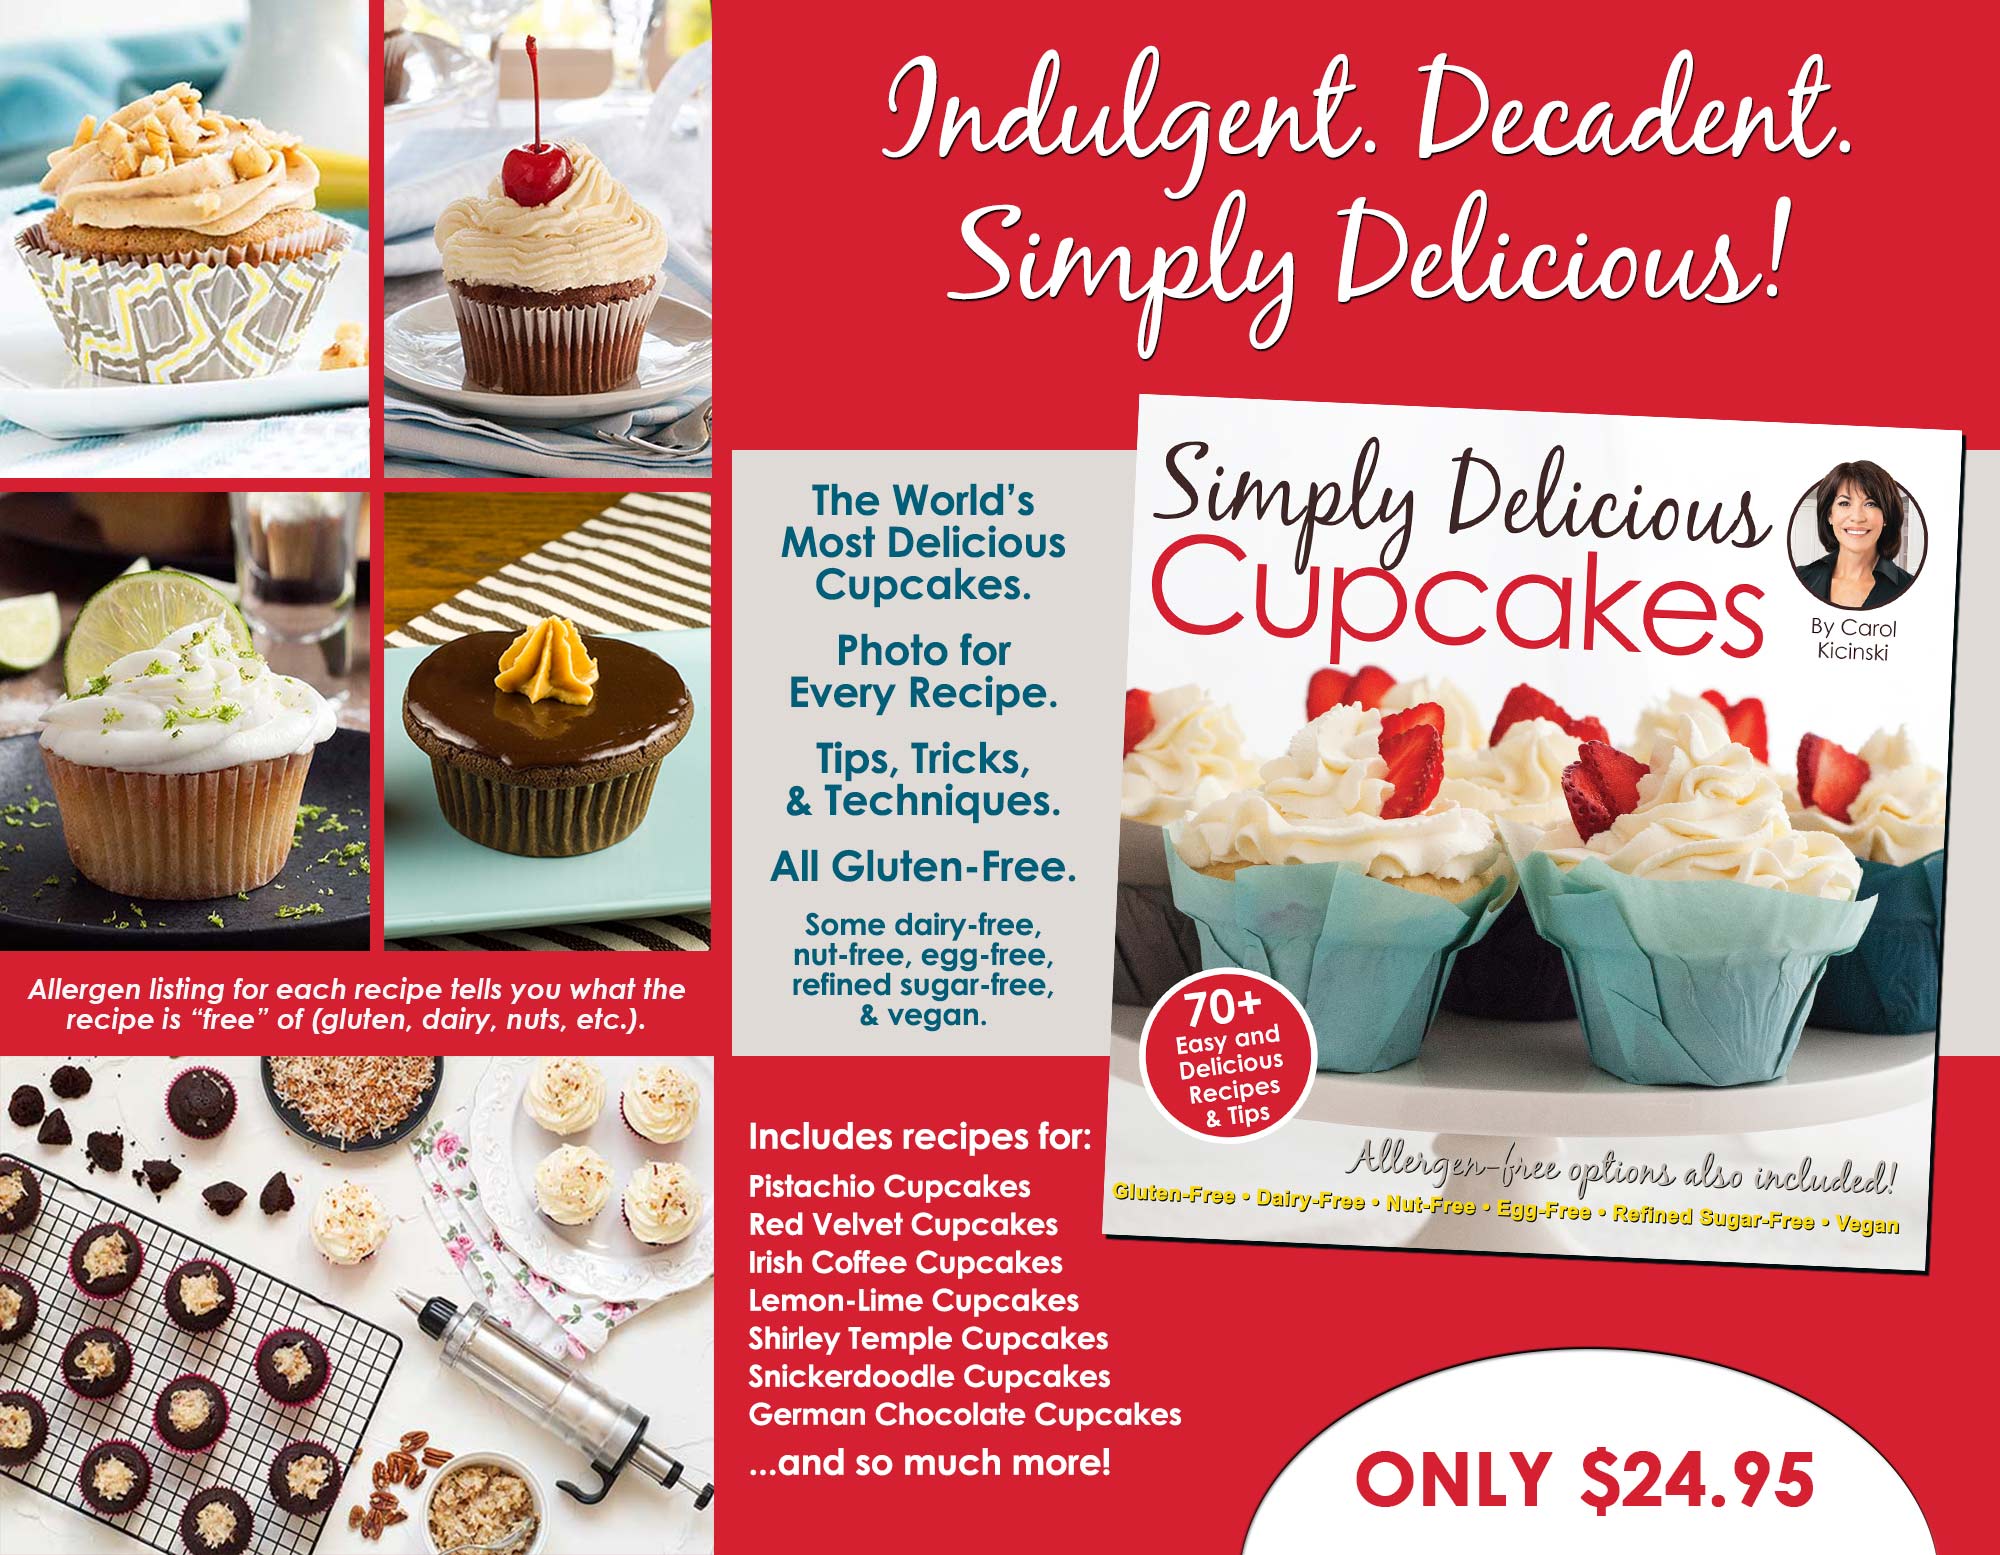 Simply Delicious Cupcakes Landing Page